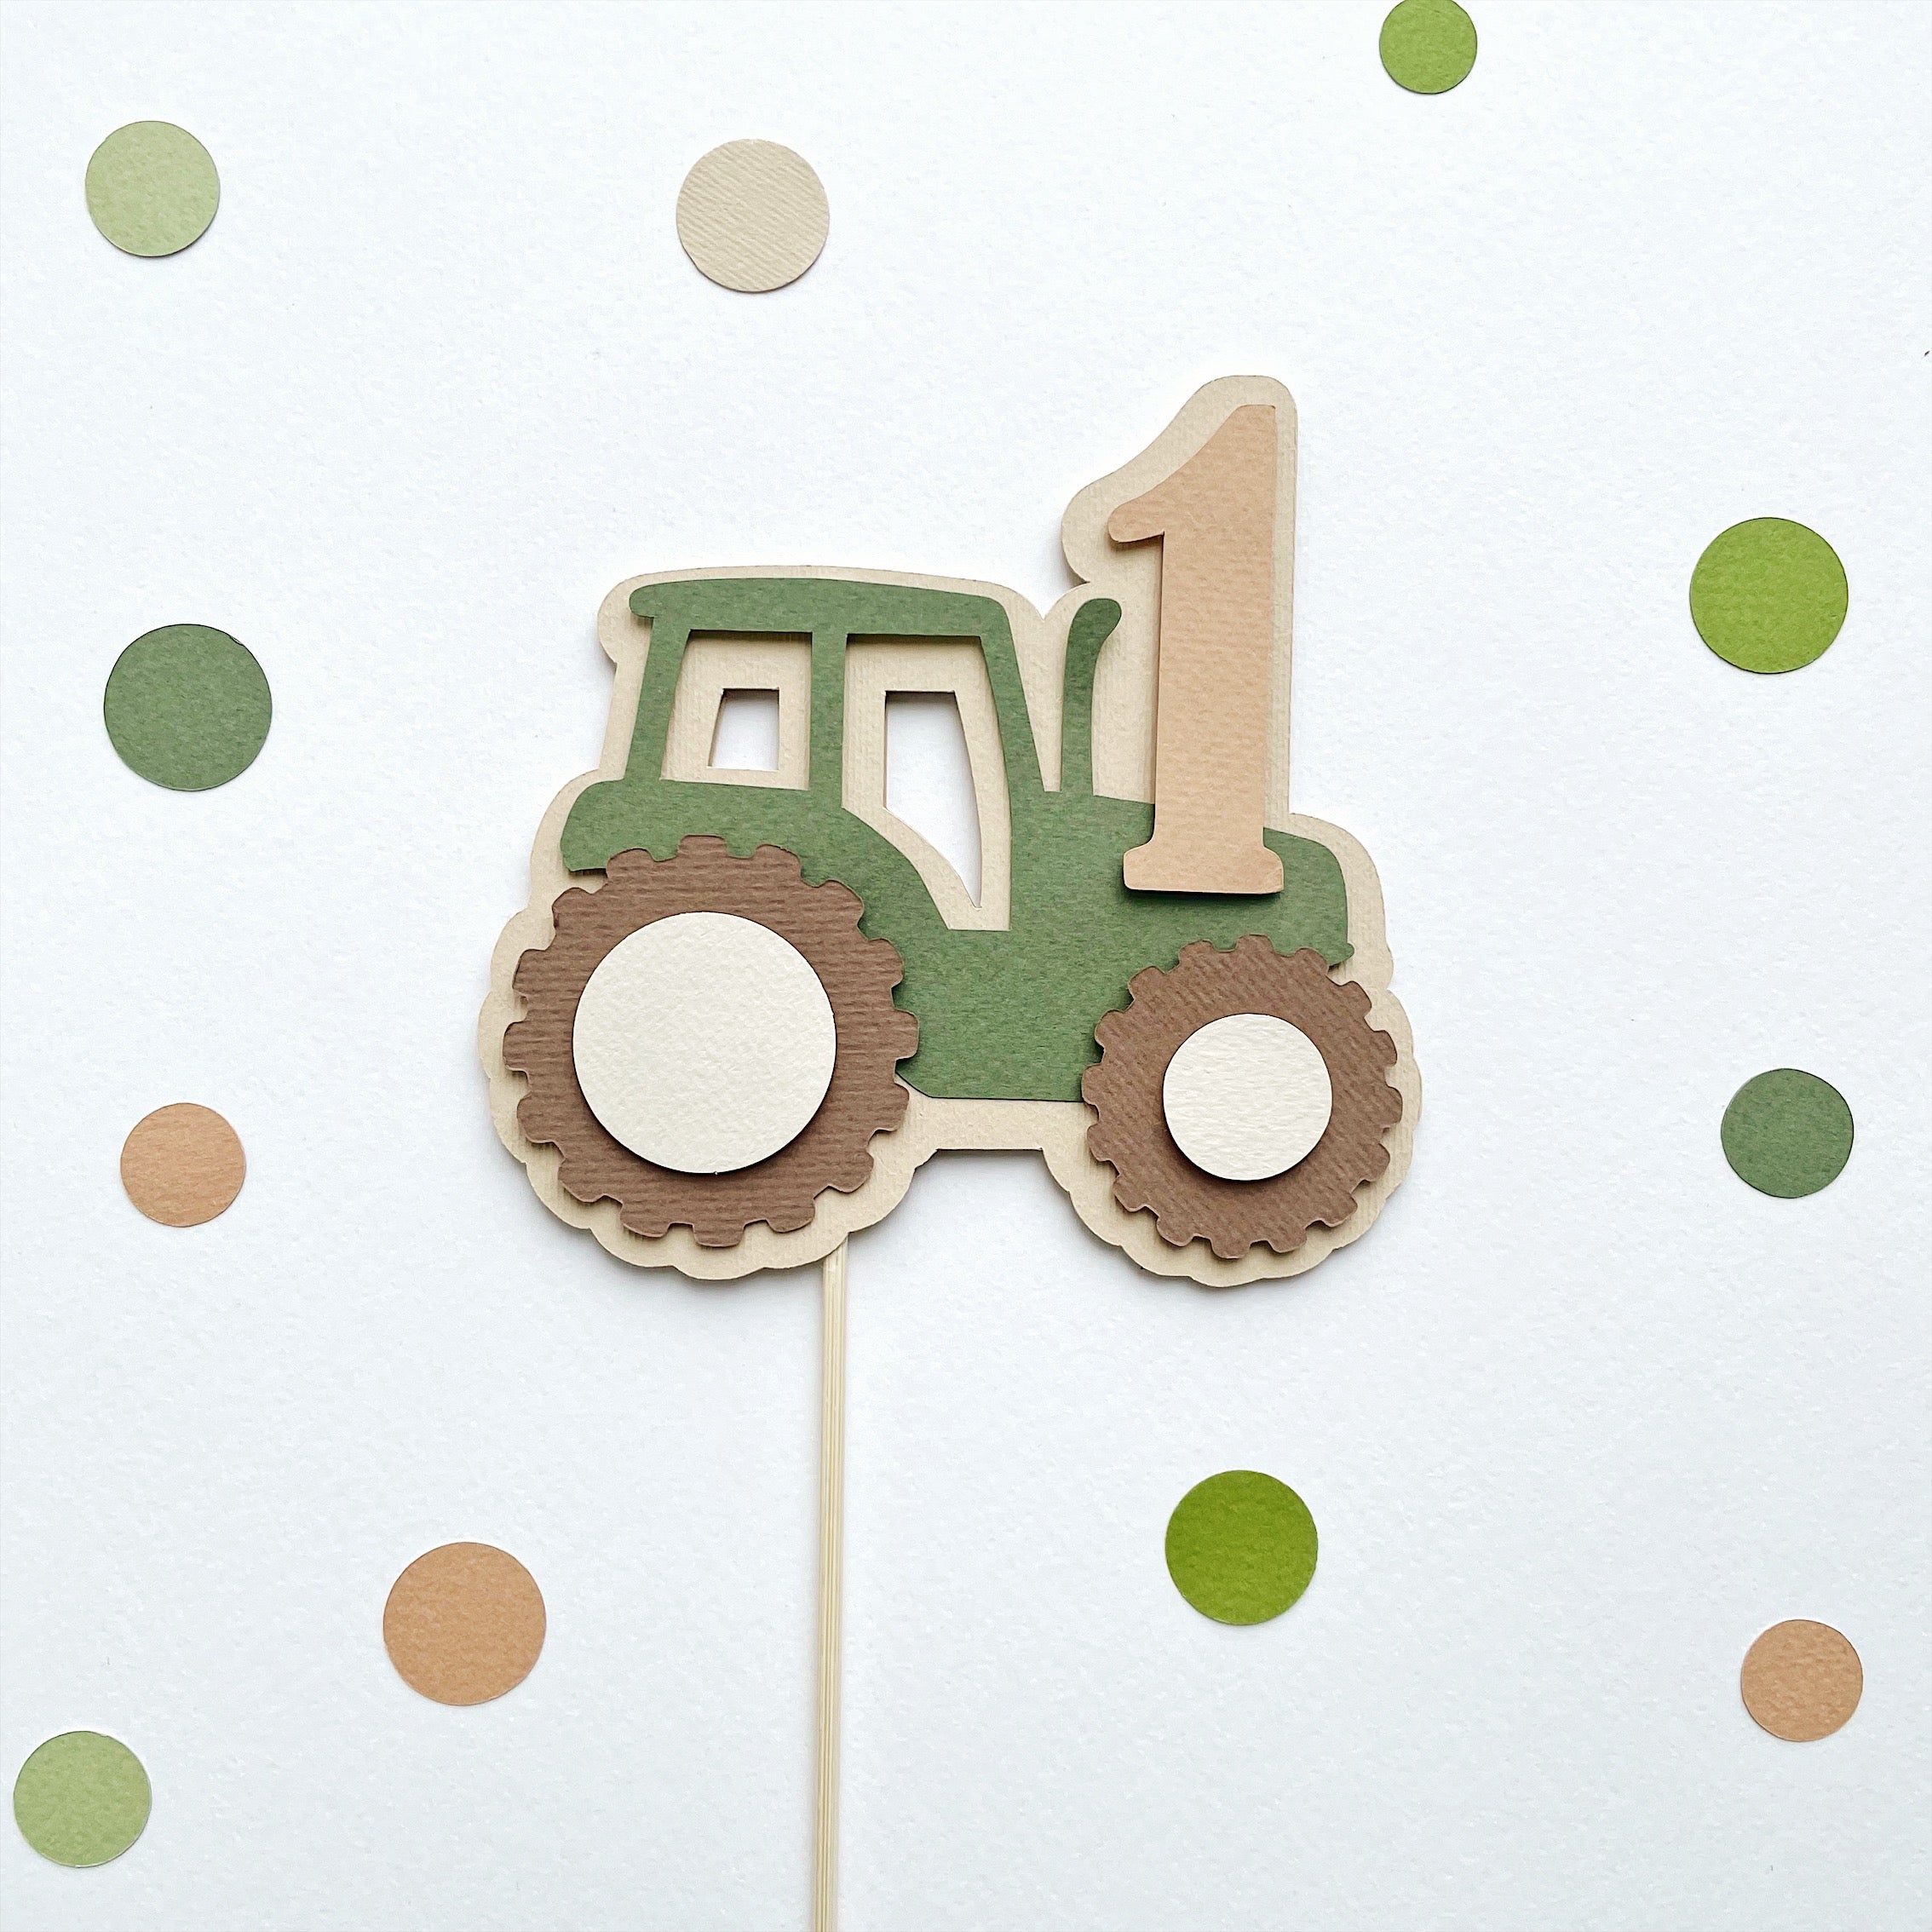 Tractor First Birthday Cake Topper Tractor First Birthday Decor Tractor Party Ides Farm theme Birthday party